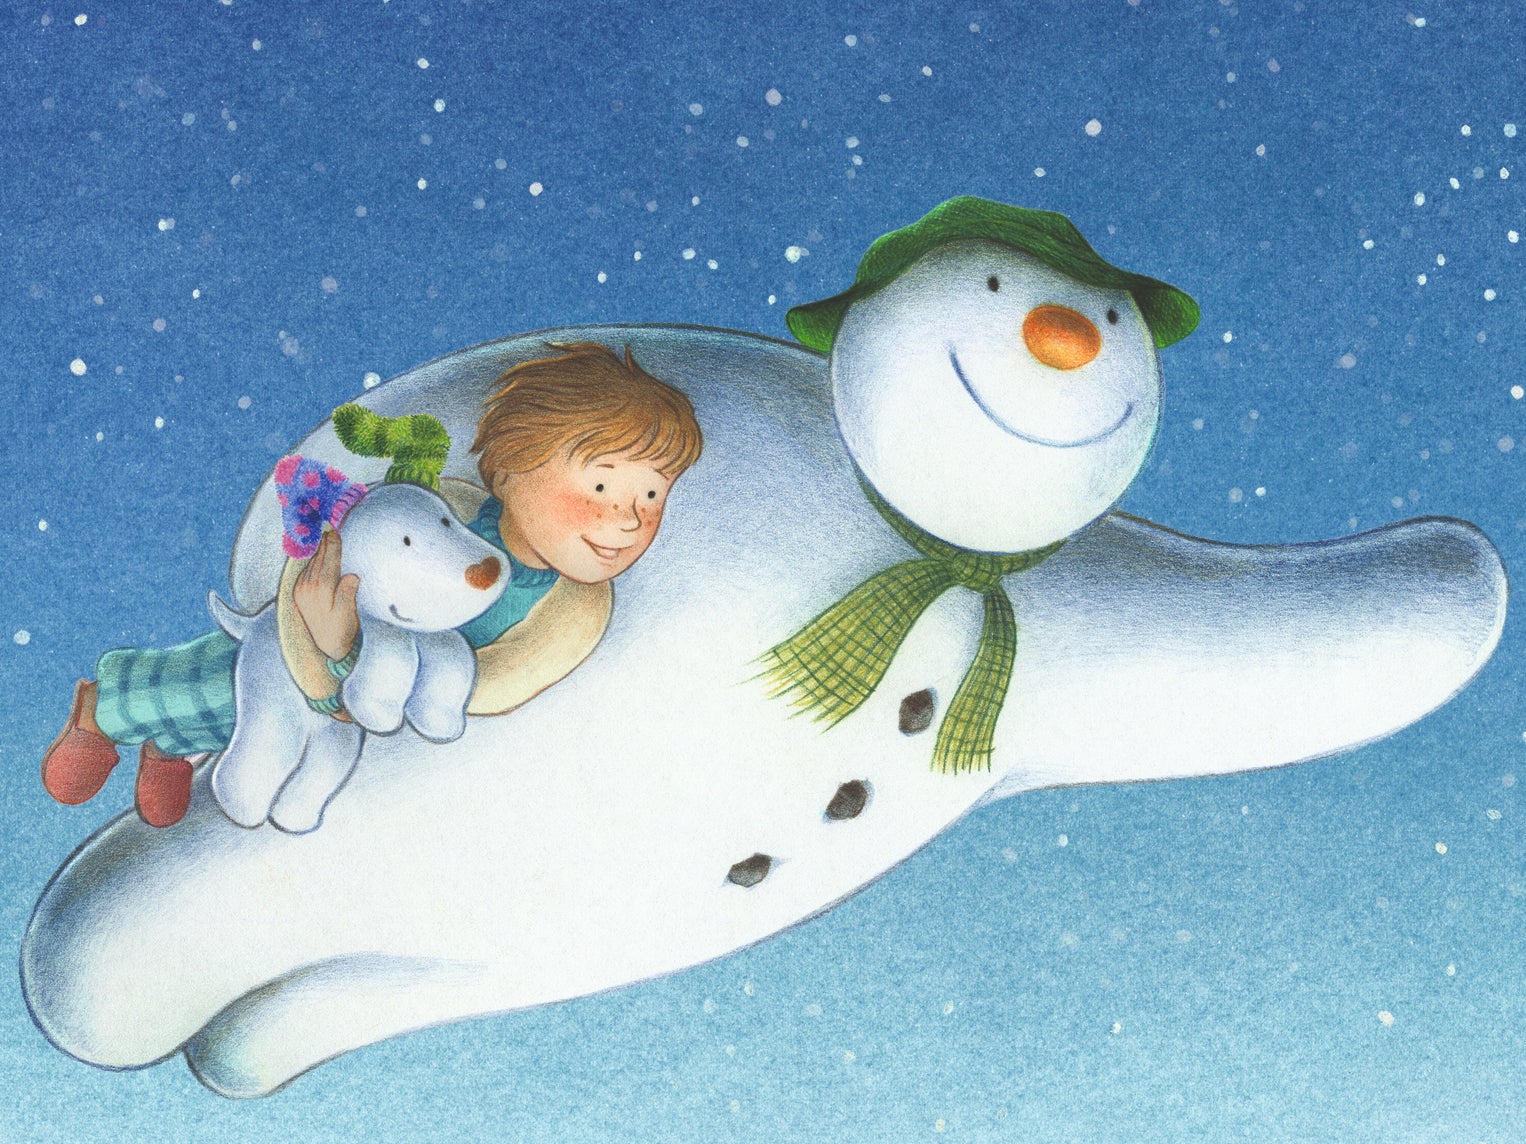 The Snowman and the Snowdog was the 2012 sequel to the original hit animation